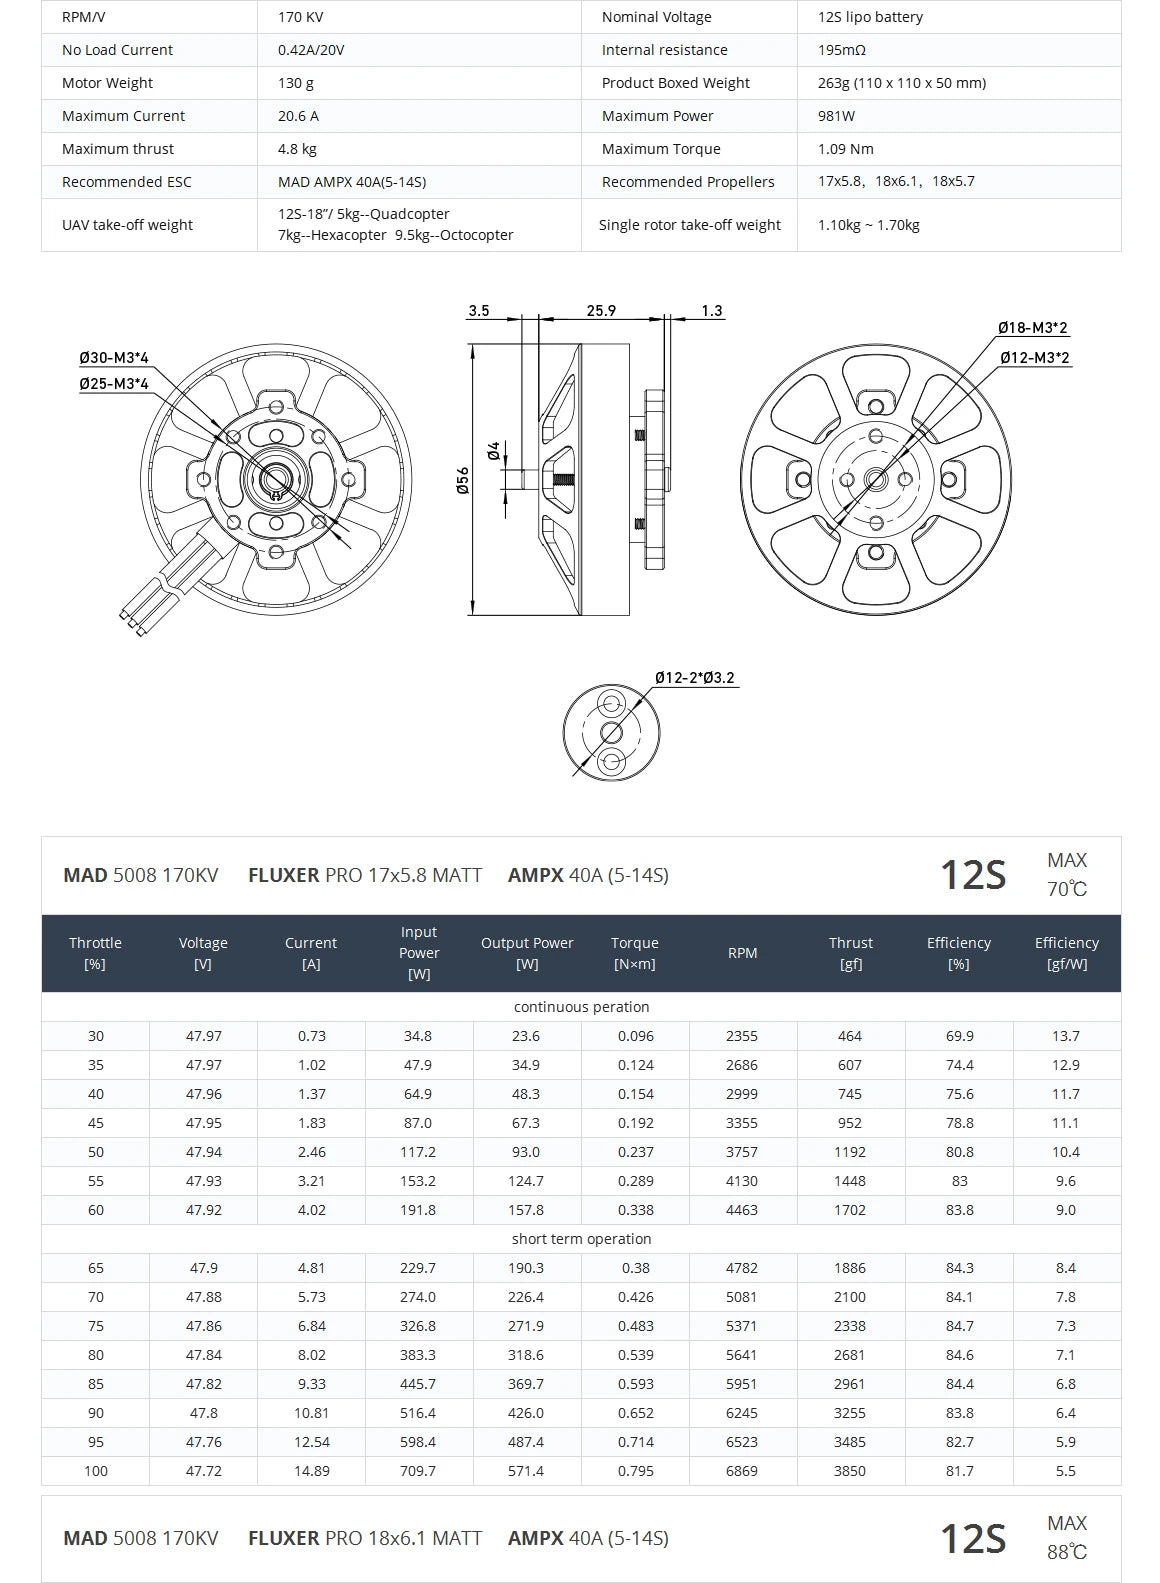 MAD 5008 EEE V2.0 Drone Motor, Motor test benchmarks and certifications, ensuring reliable performance and quality.